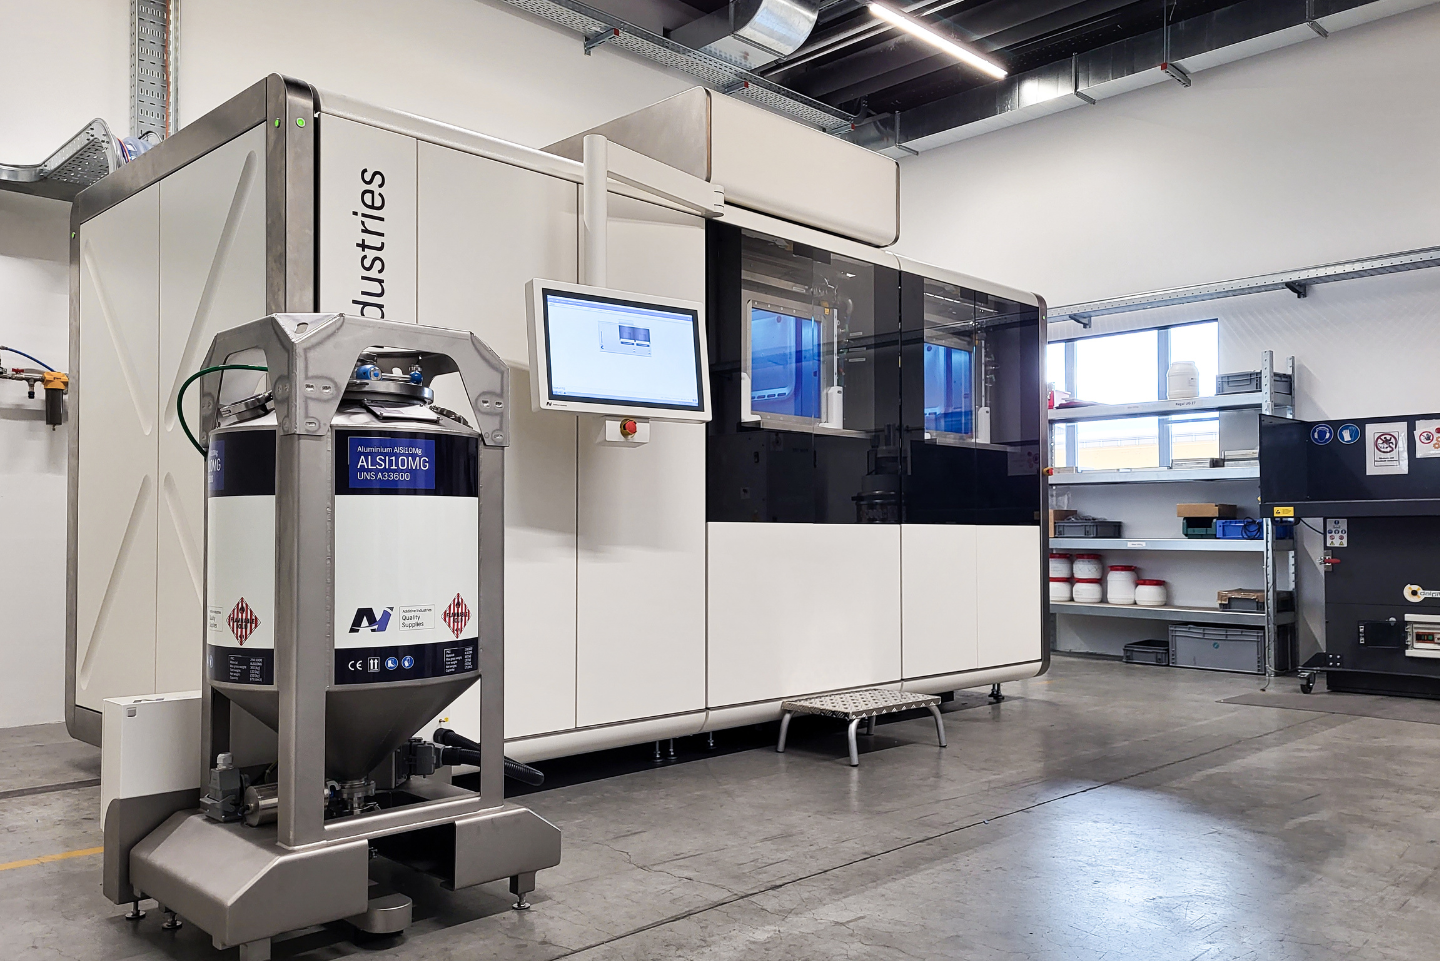 ADDDAM selects MetalFABG2 for expansion in automotive industry